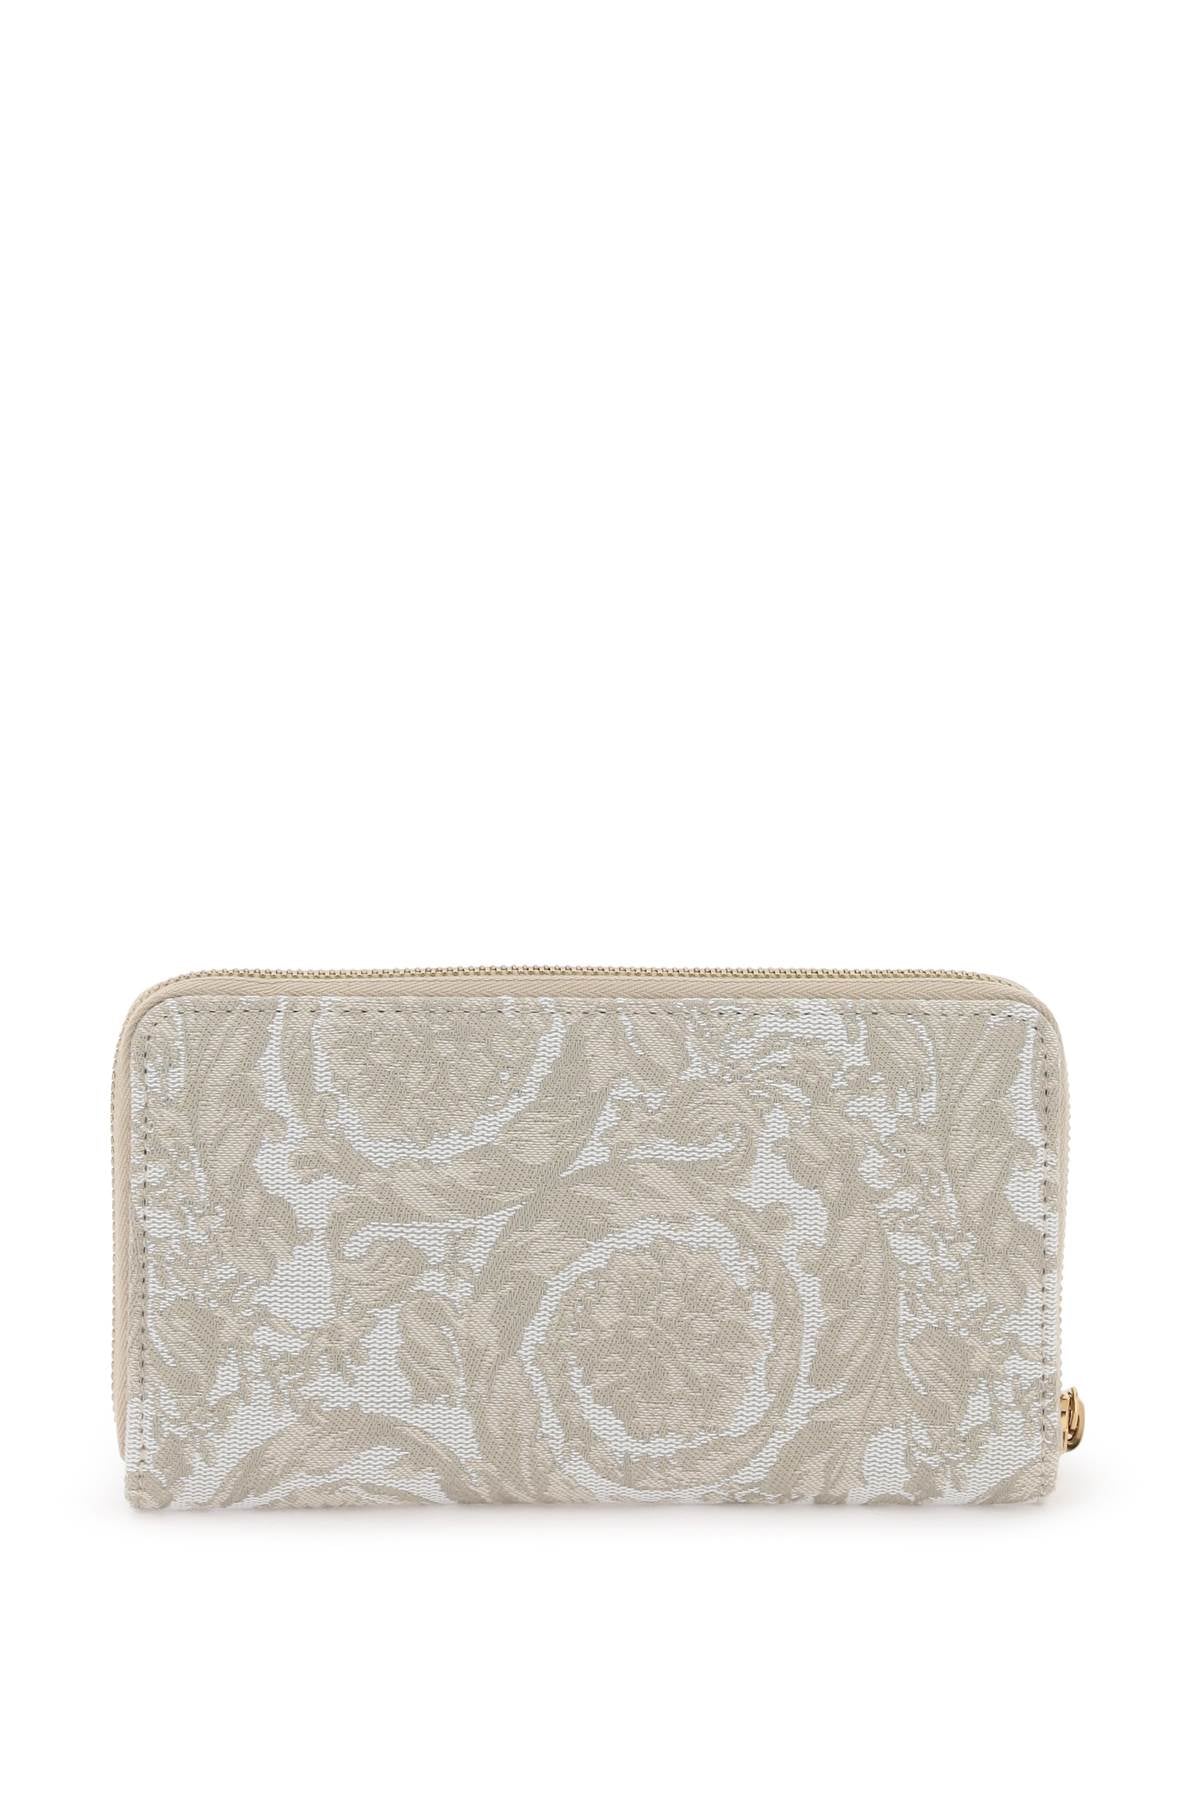 VERSACE Vintage-Inspired Jacquard Long Wallet for Women